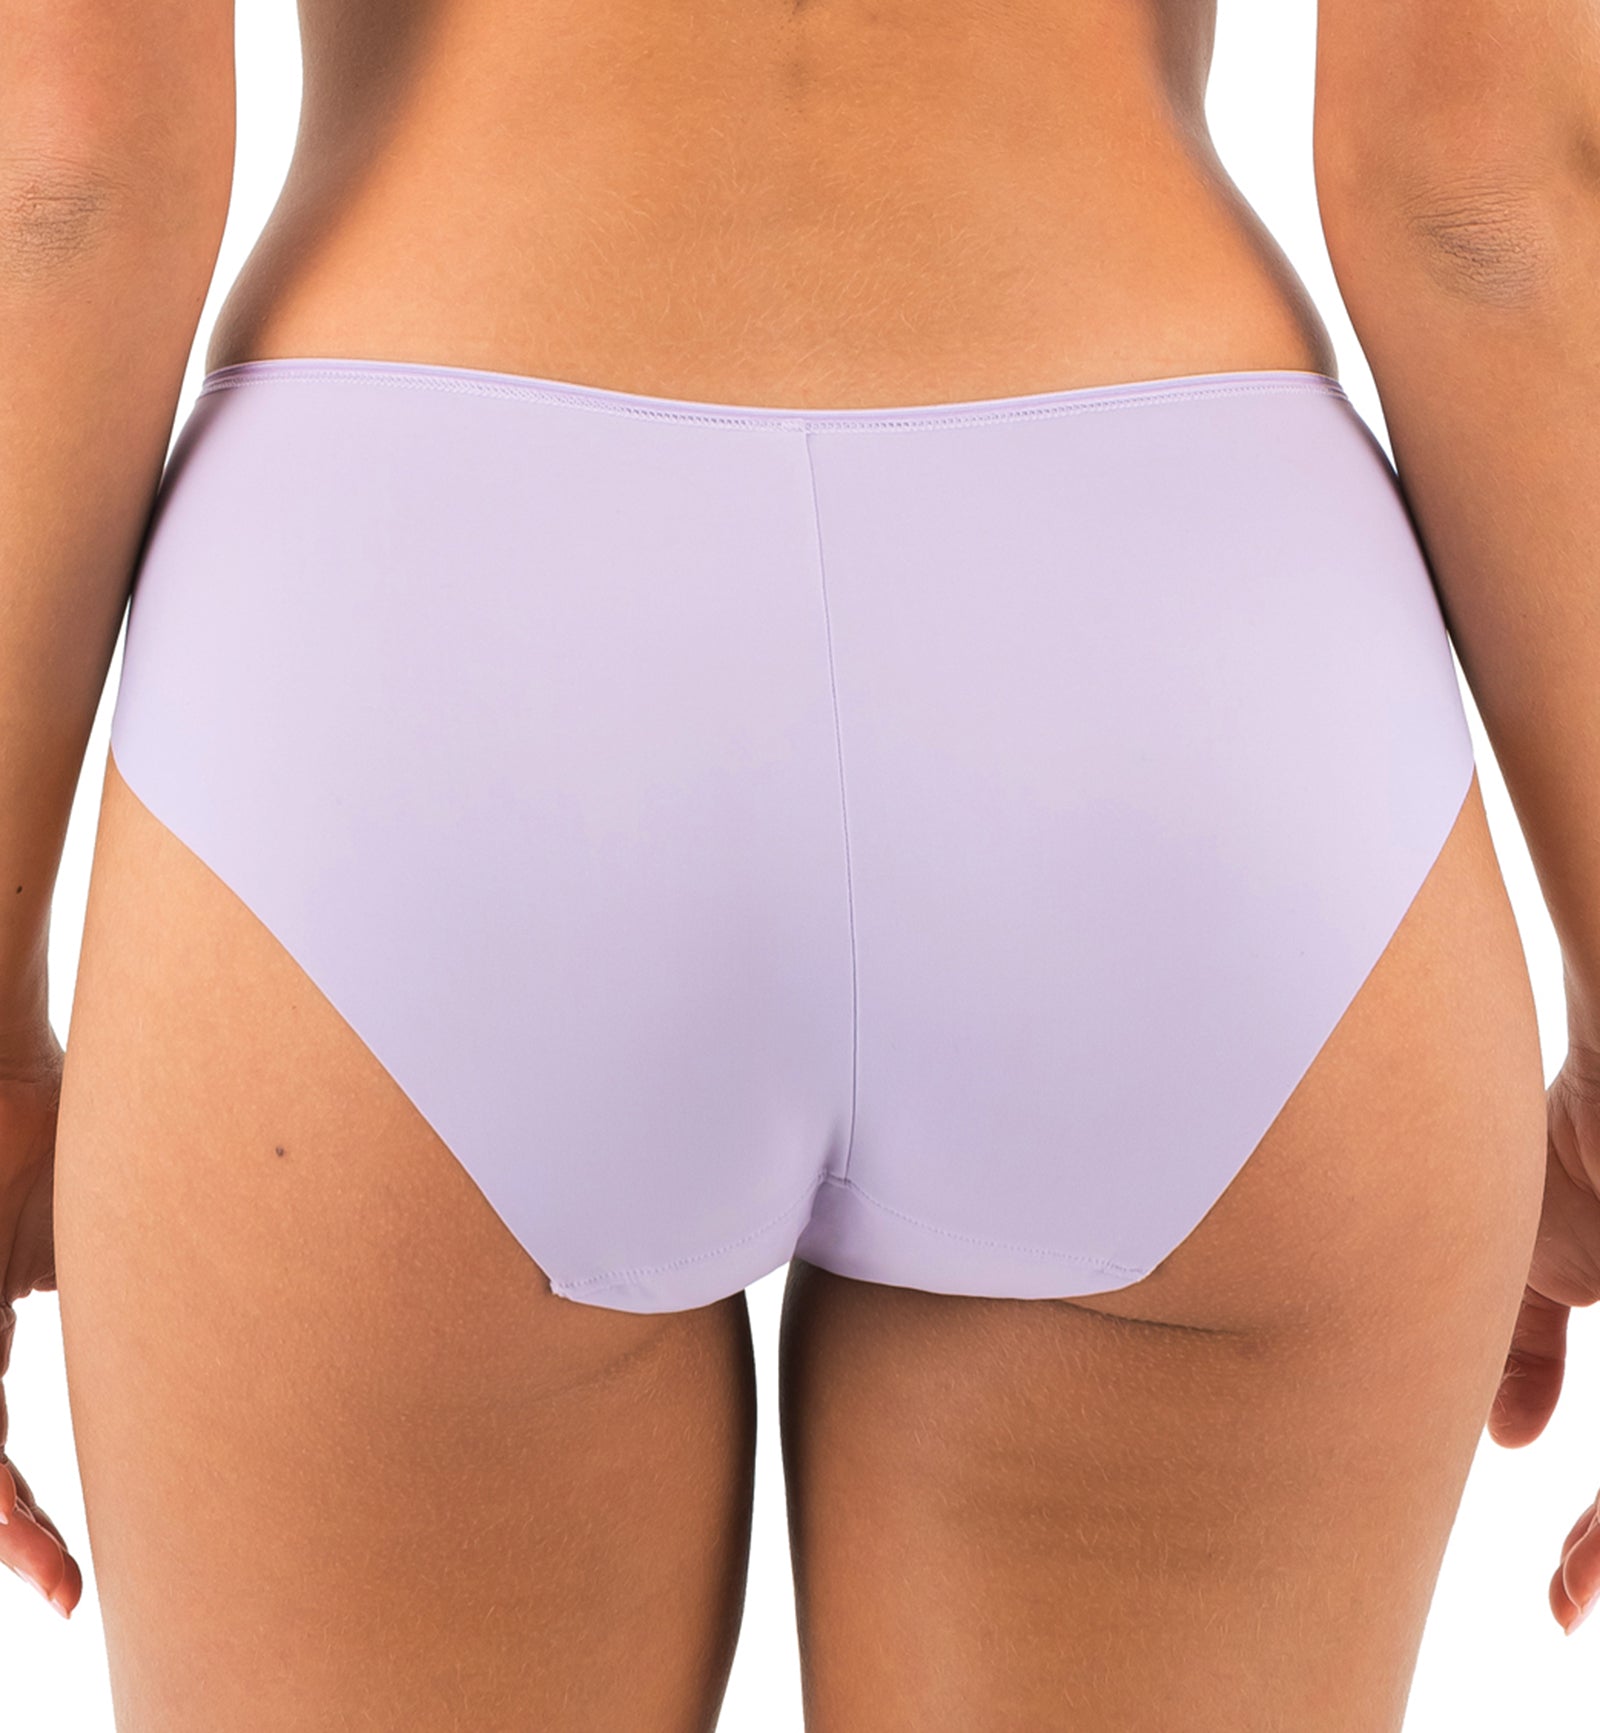 Fantasie Illusion Brief (2985),Small,Orchid - Orchid,Small